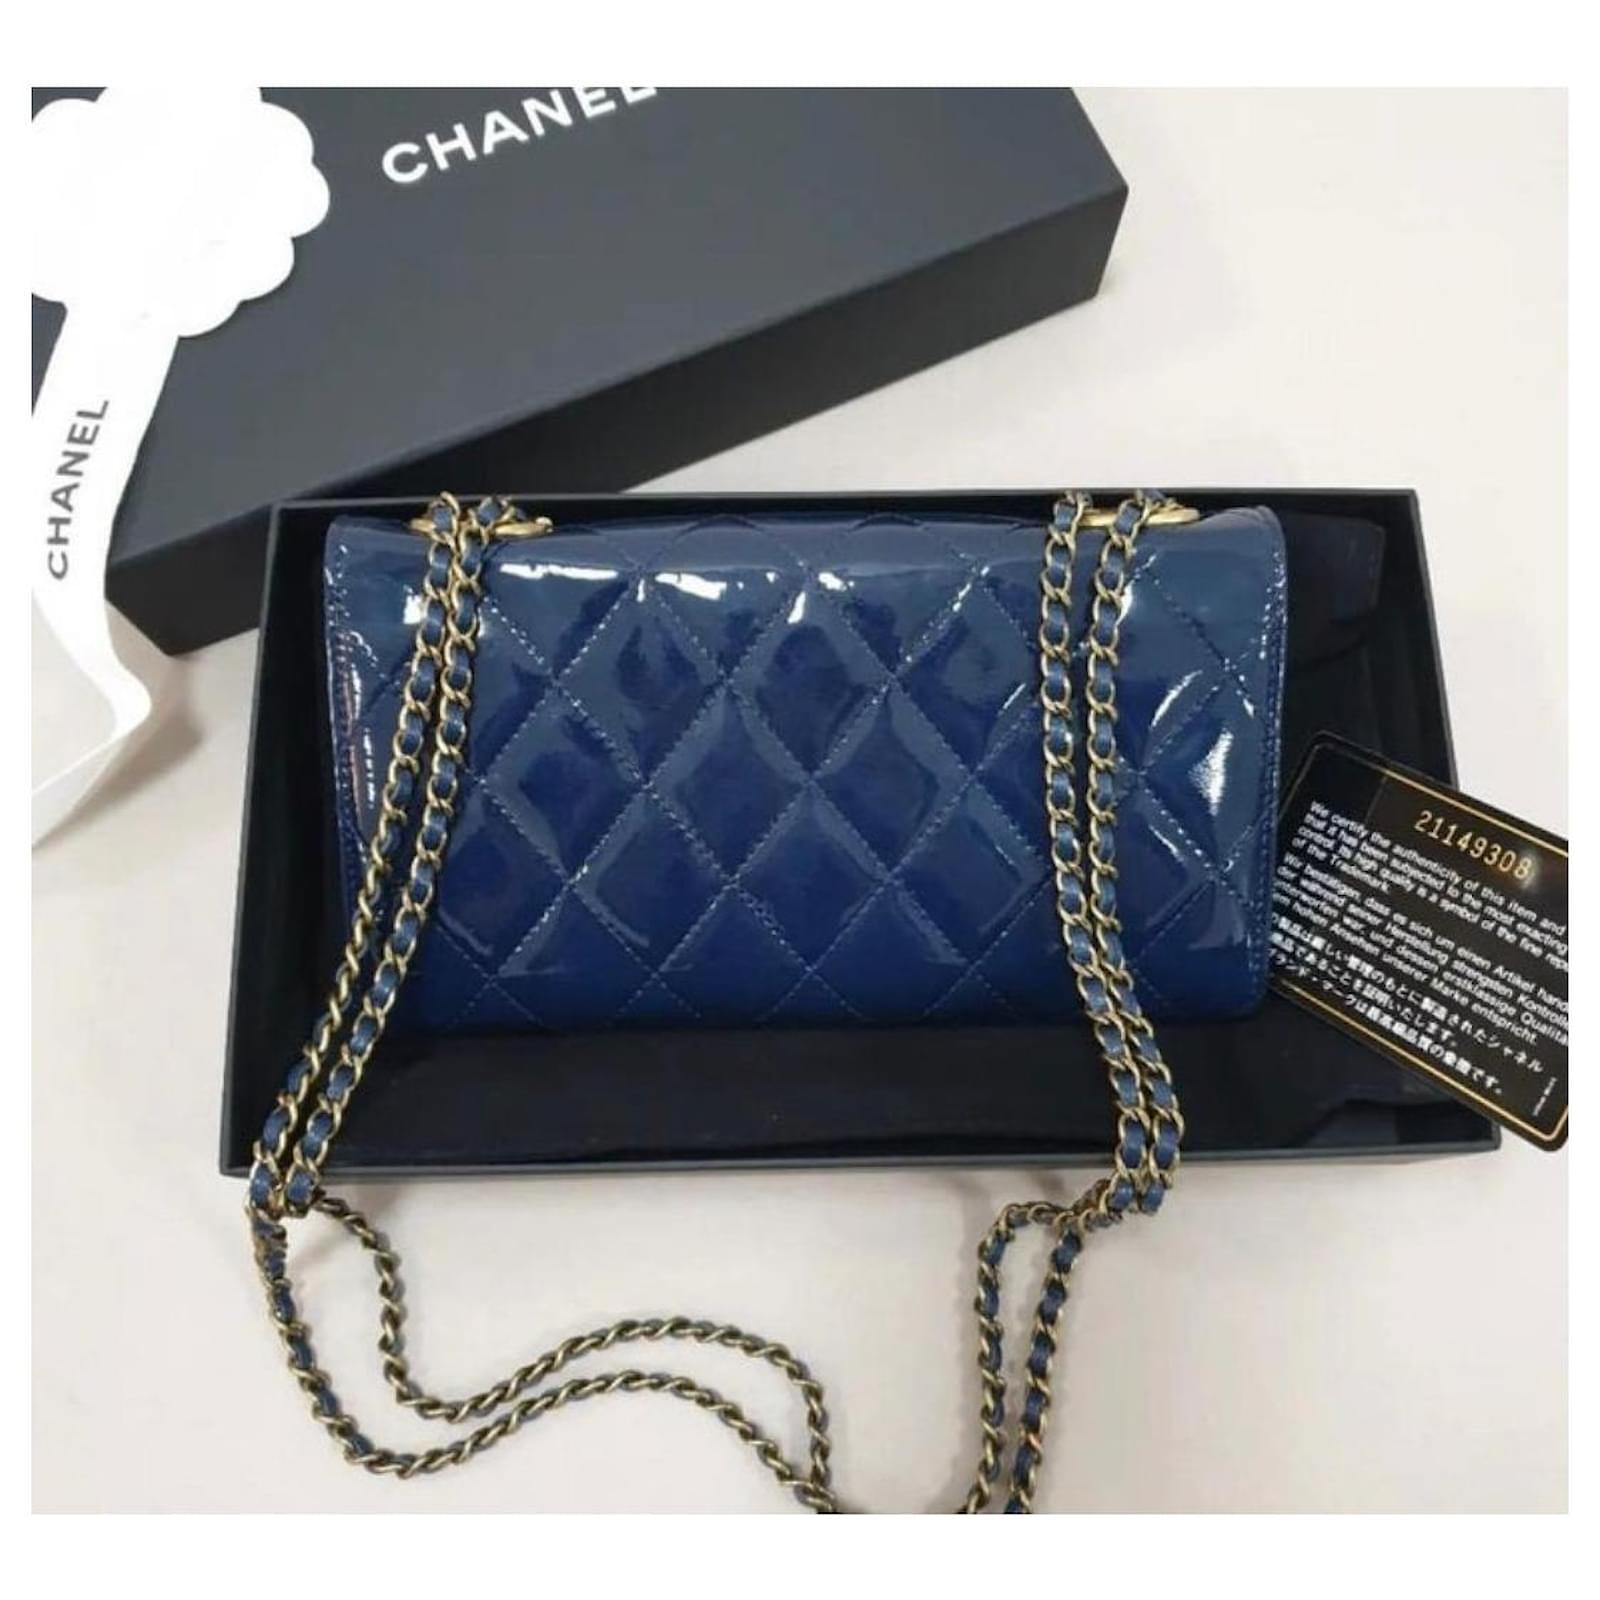 Chanel Wallet On Chain Review: Most Popular Chanel Bag? - Fashion